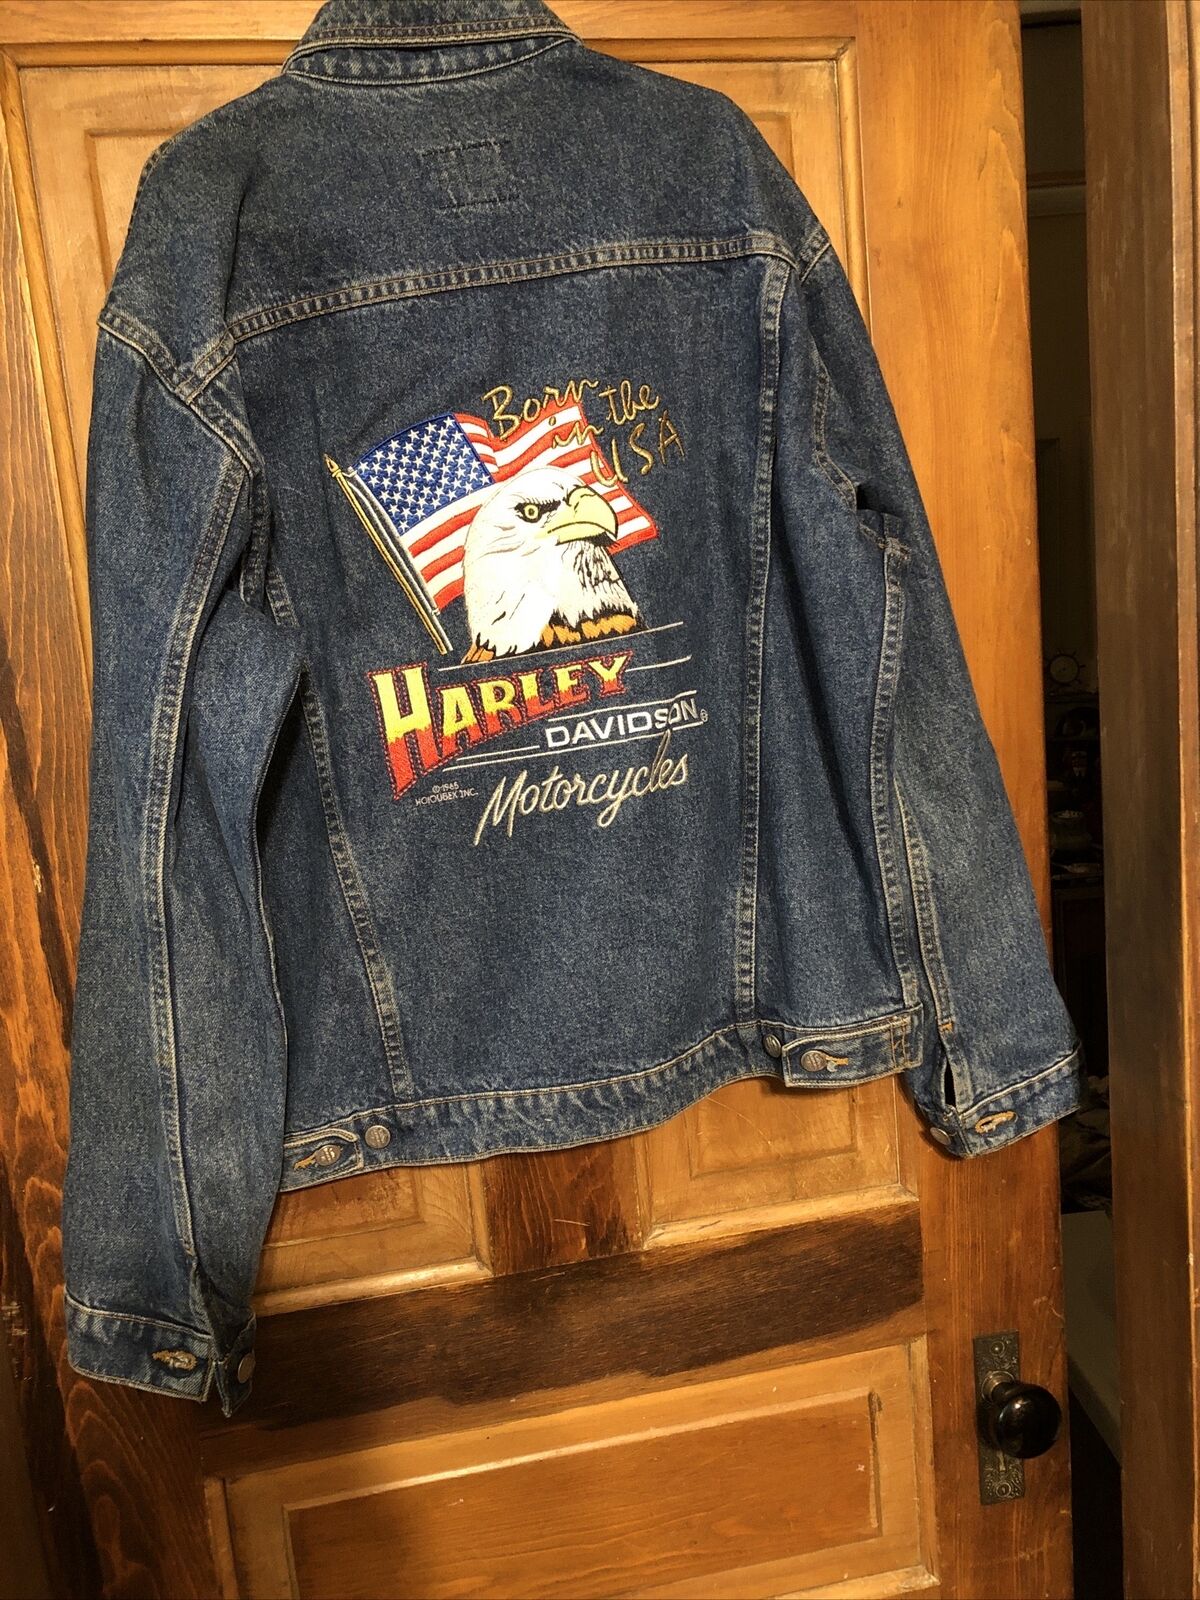 1985 BORN IN THE USA HARLEY DAVIDSON Full Back Color Embroidery Sewn Jean Jacket